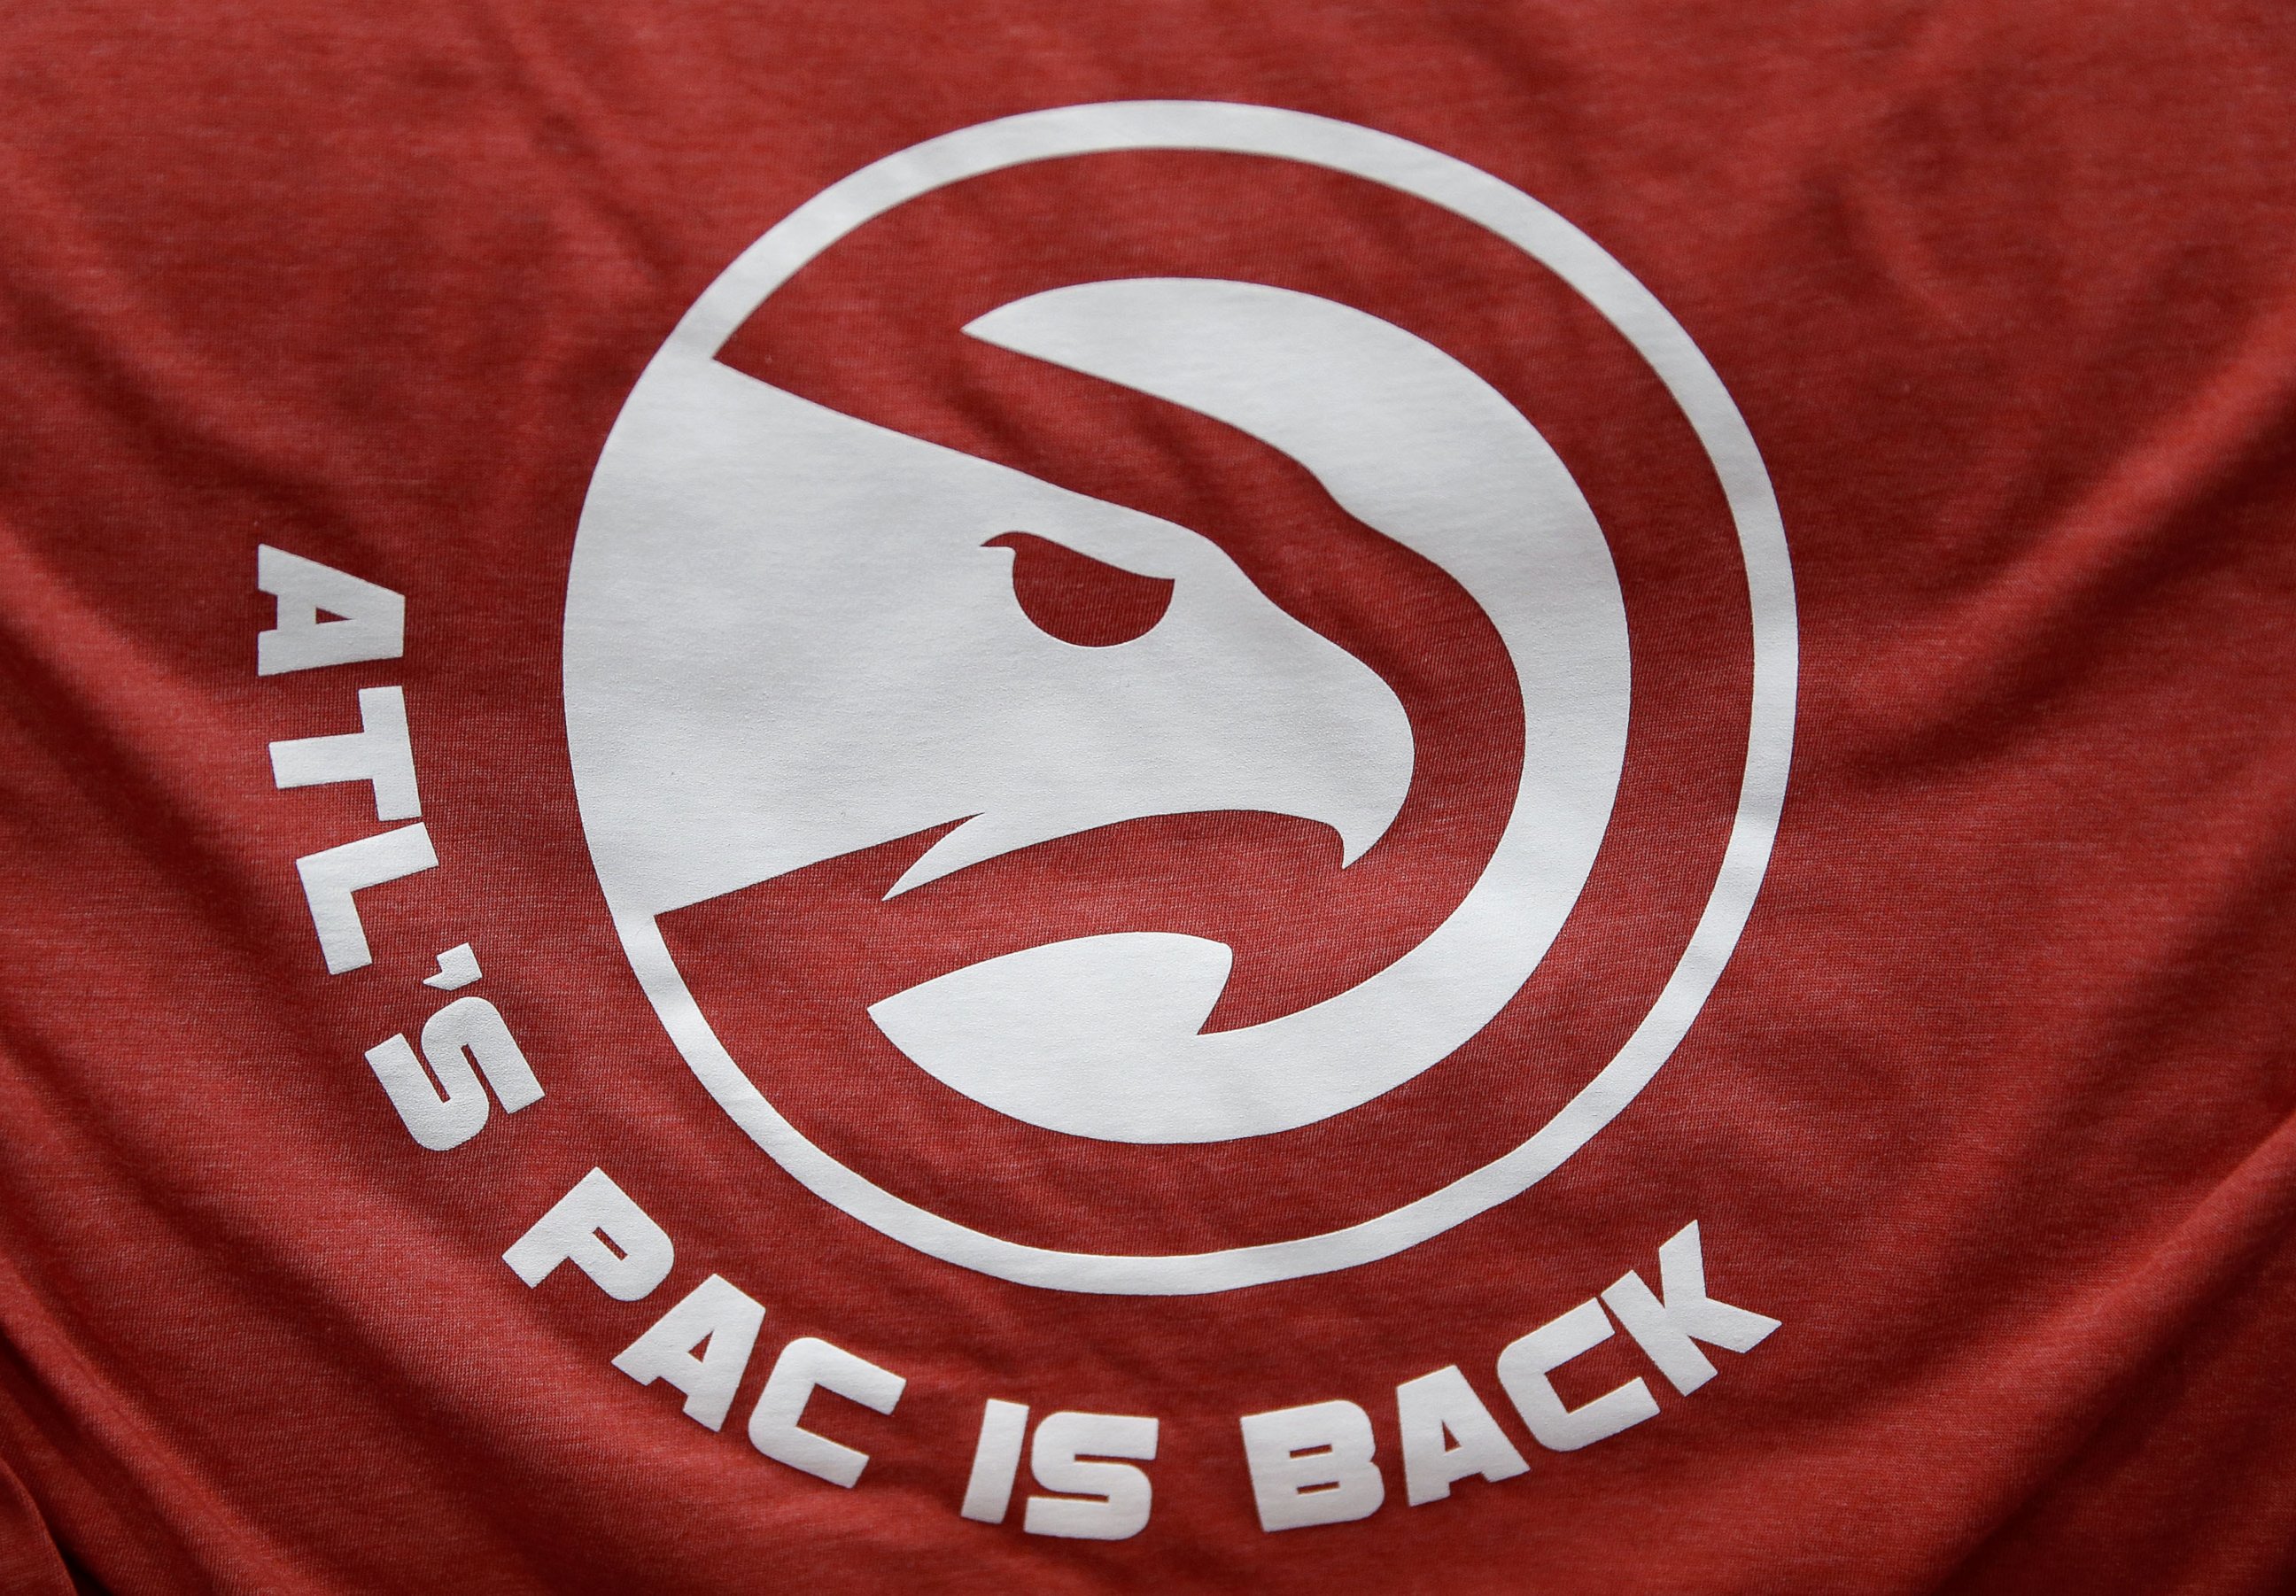 PHOTO: The Atlanta Hawks introduced their secondary logo on t-shirts that were distributed to fans during the 2014 NBA Playoffs at Philips Arena on May 1, 2014 in Atlanta, Ga.  